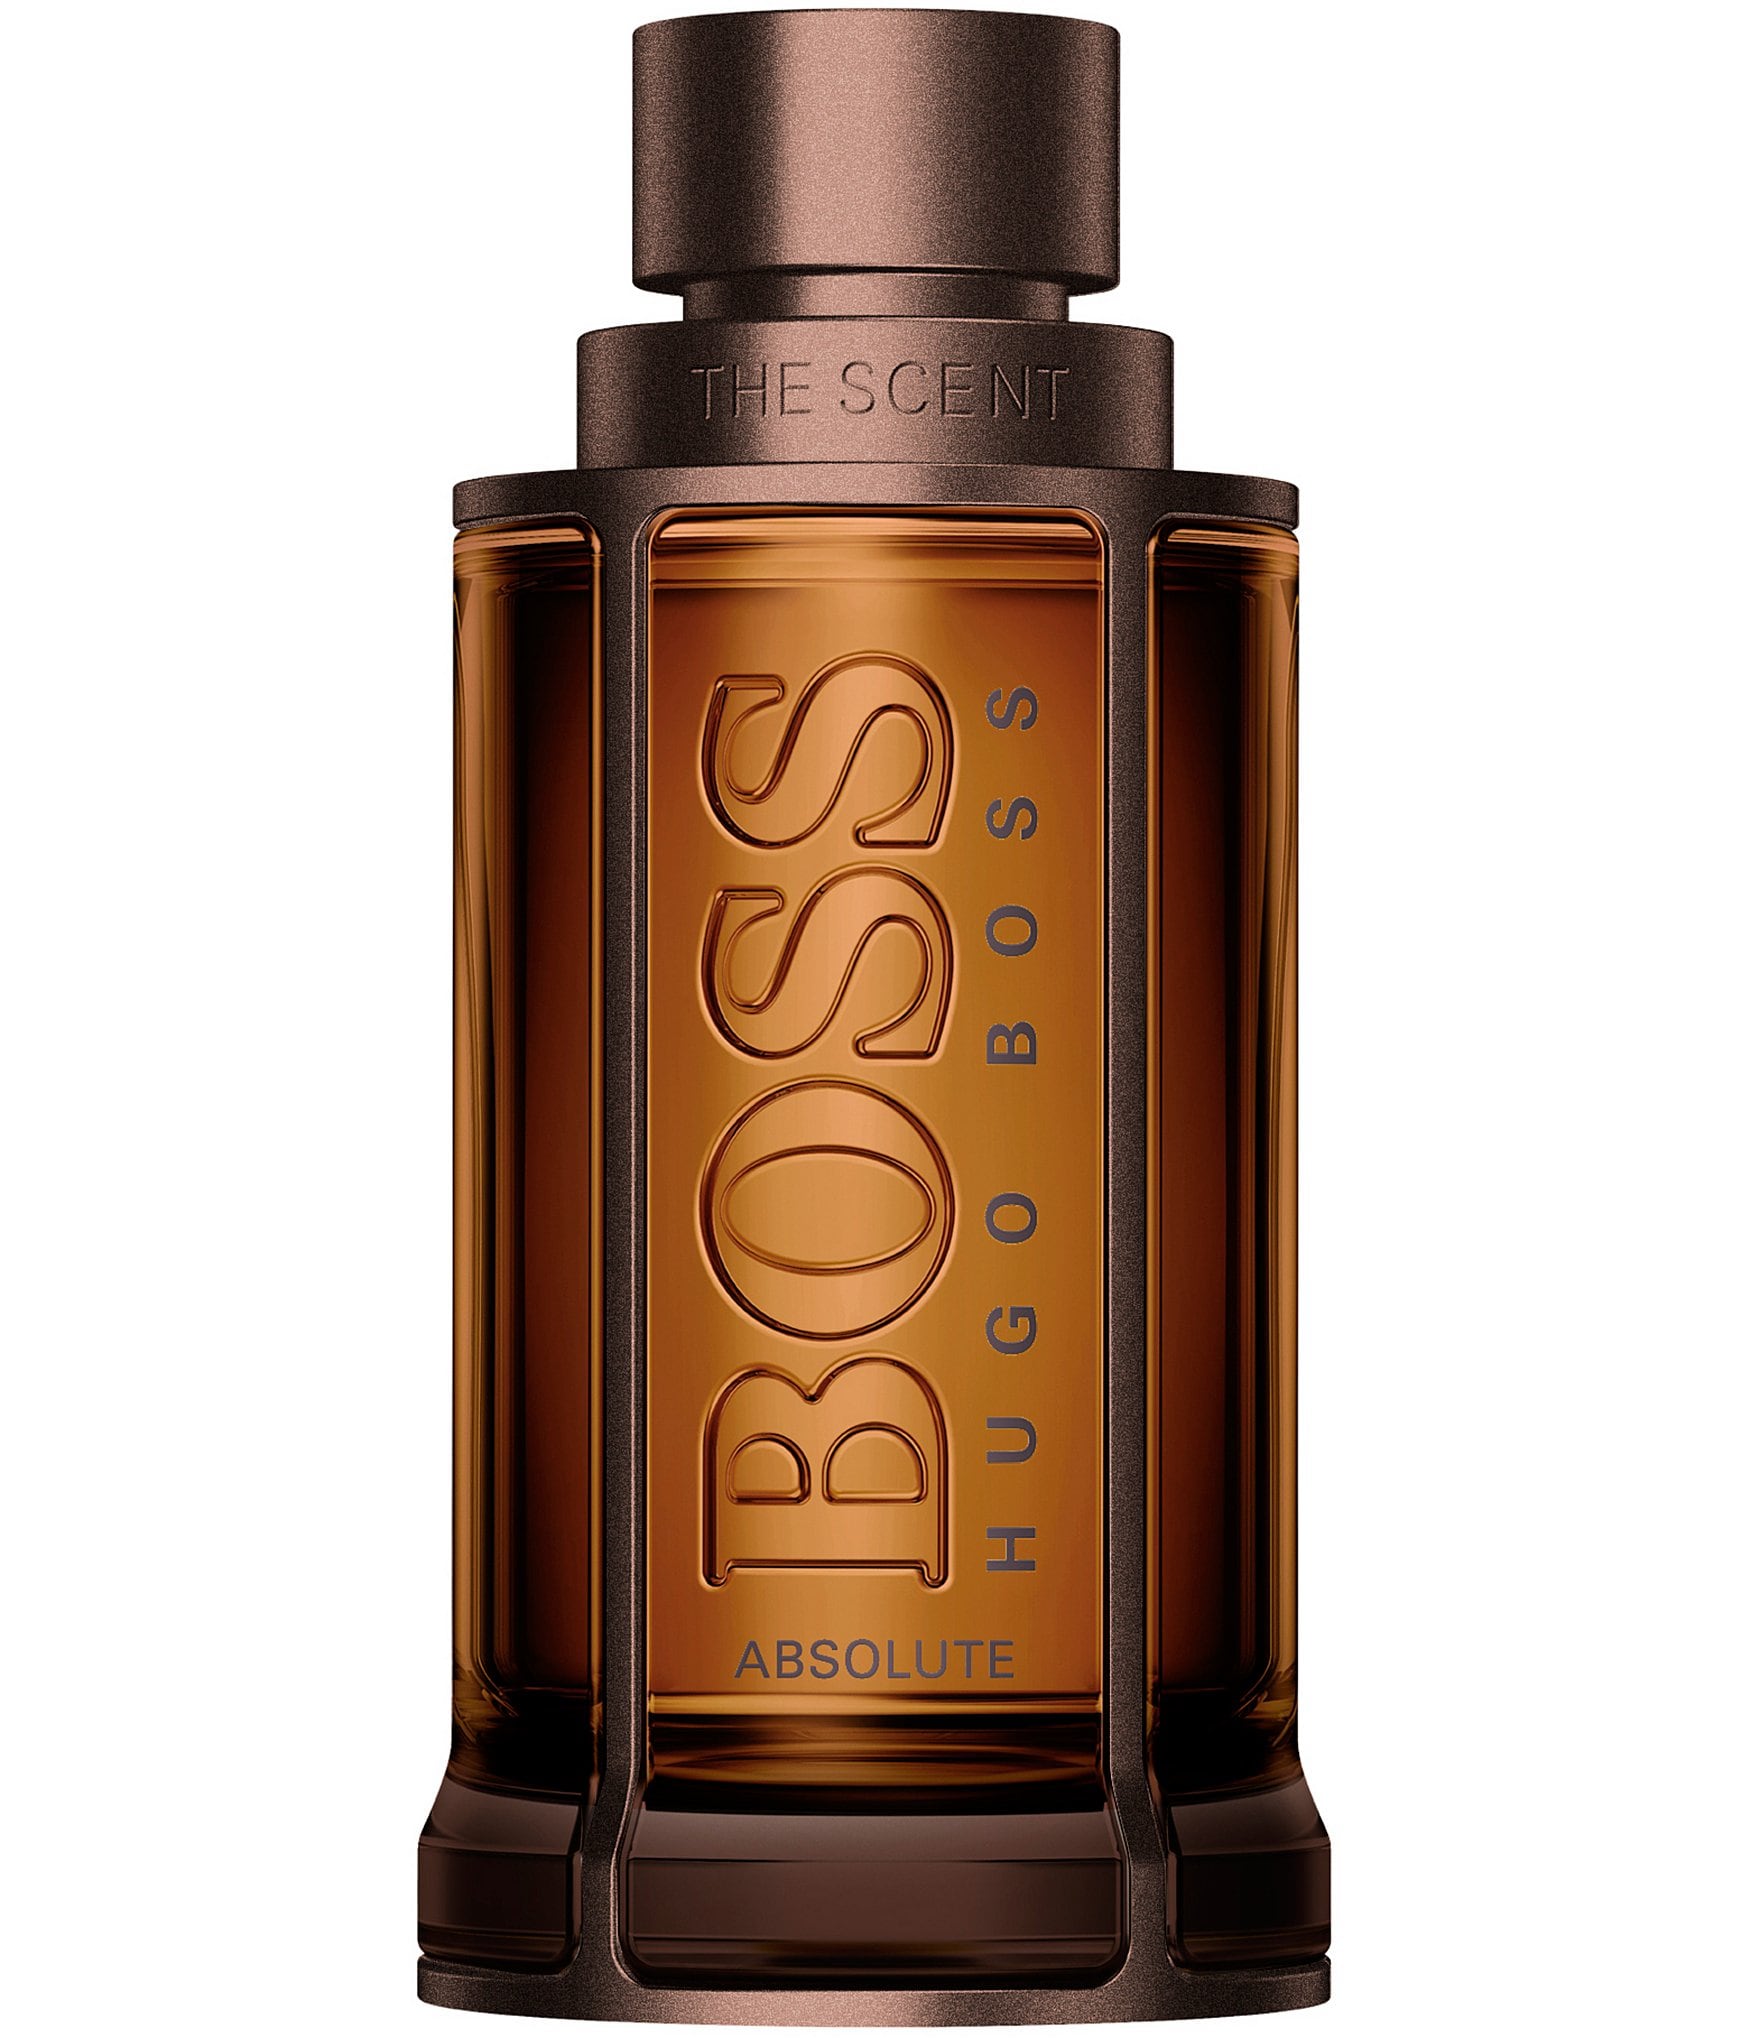 Hugo Boss Boss The Scent Absolute for 